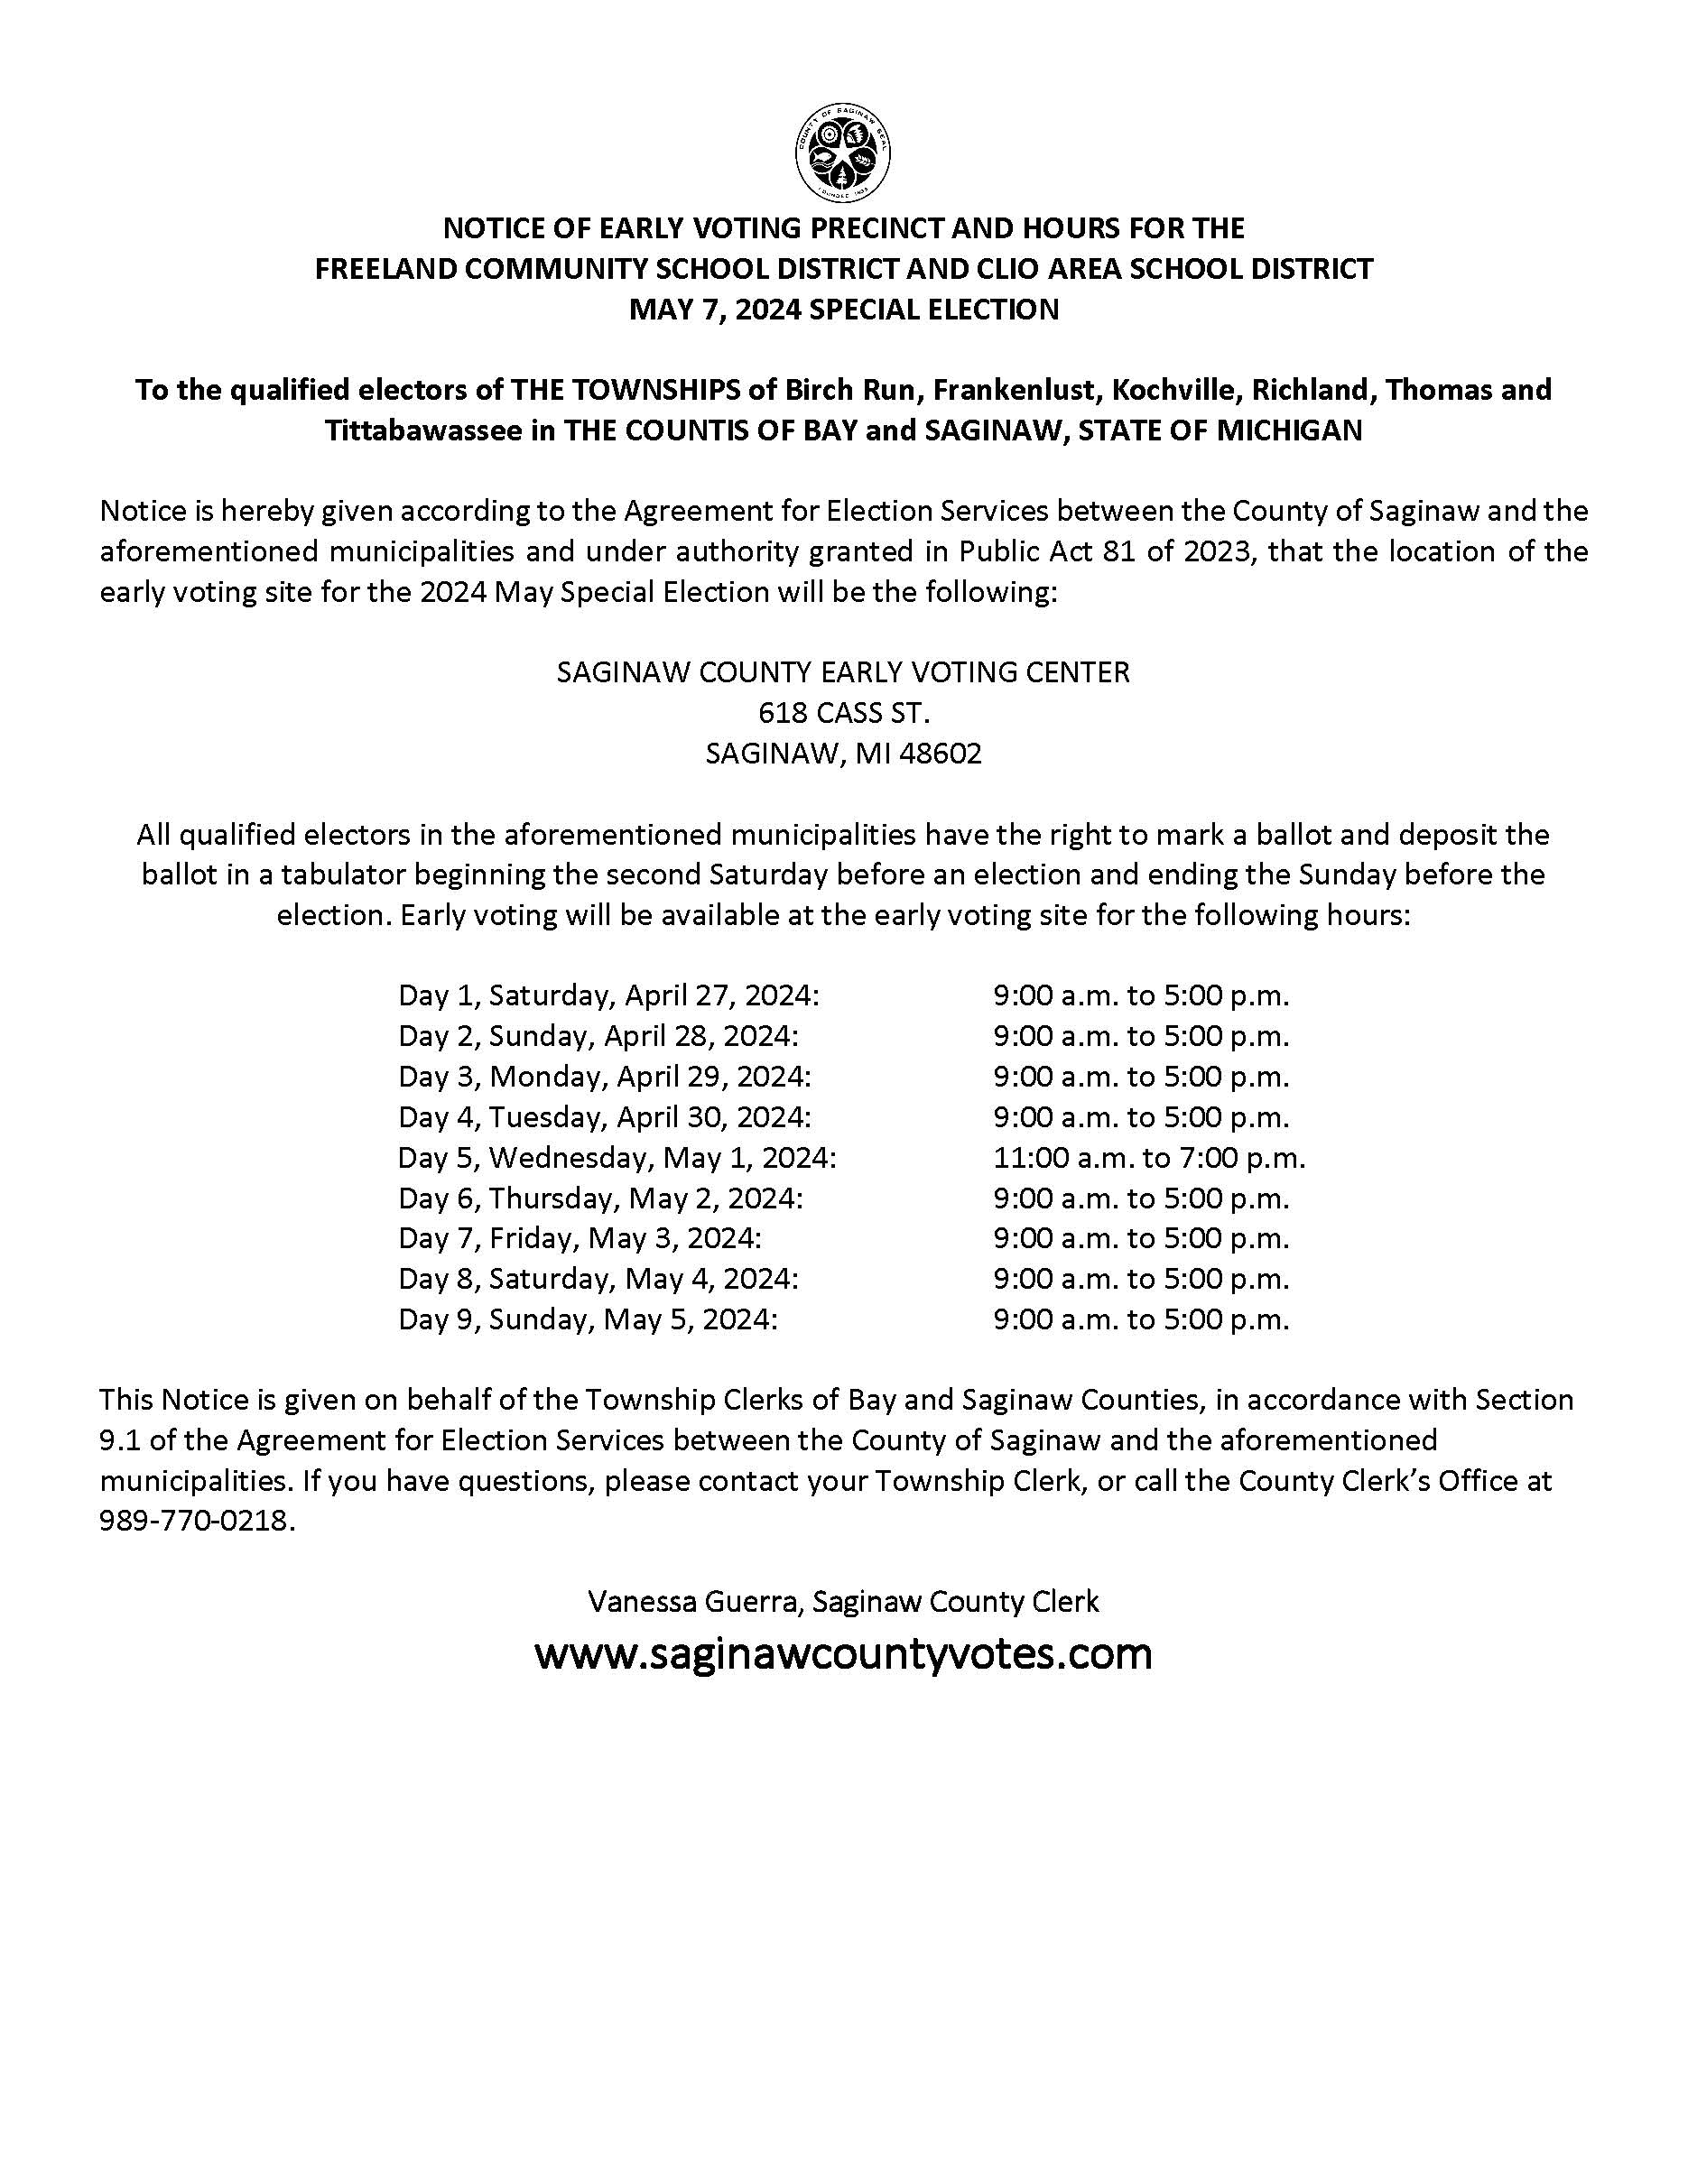 5.7.24 Saginaw County Early Voting Notice